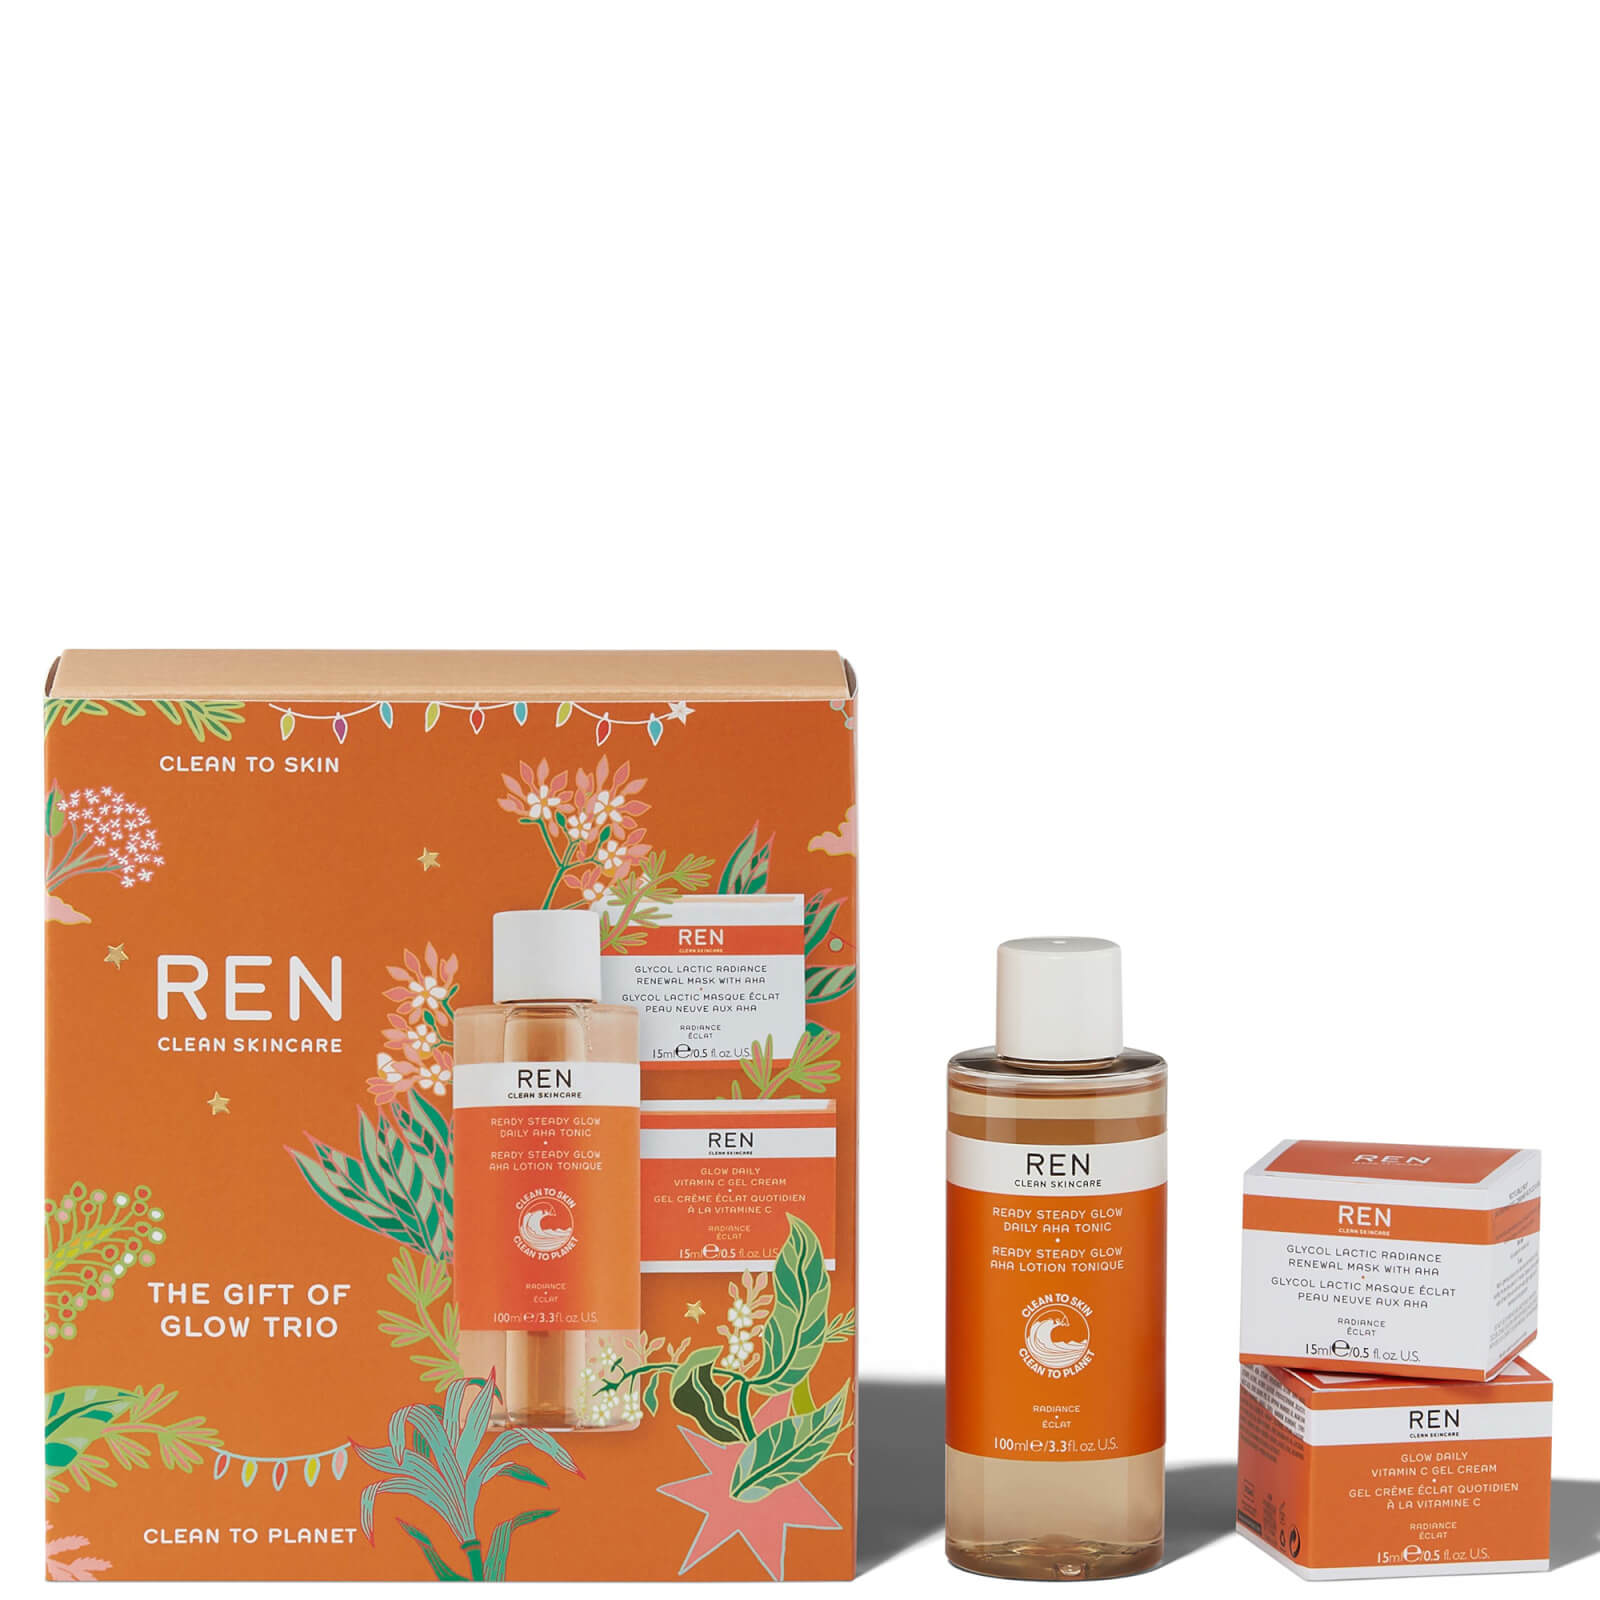 Ren Clean Skincare The Gift Of Glow Trio (worth $60.00) In Neutrals